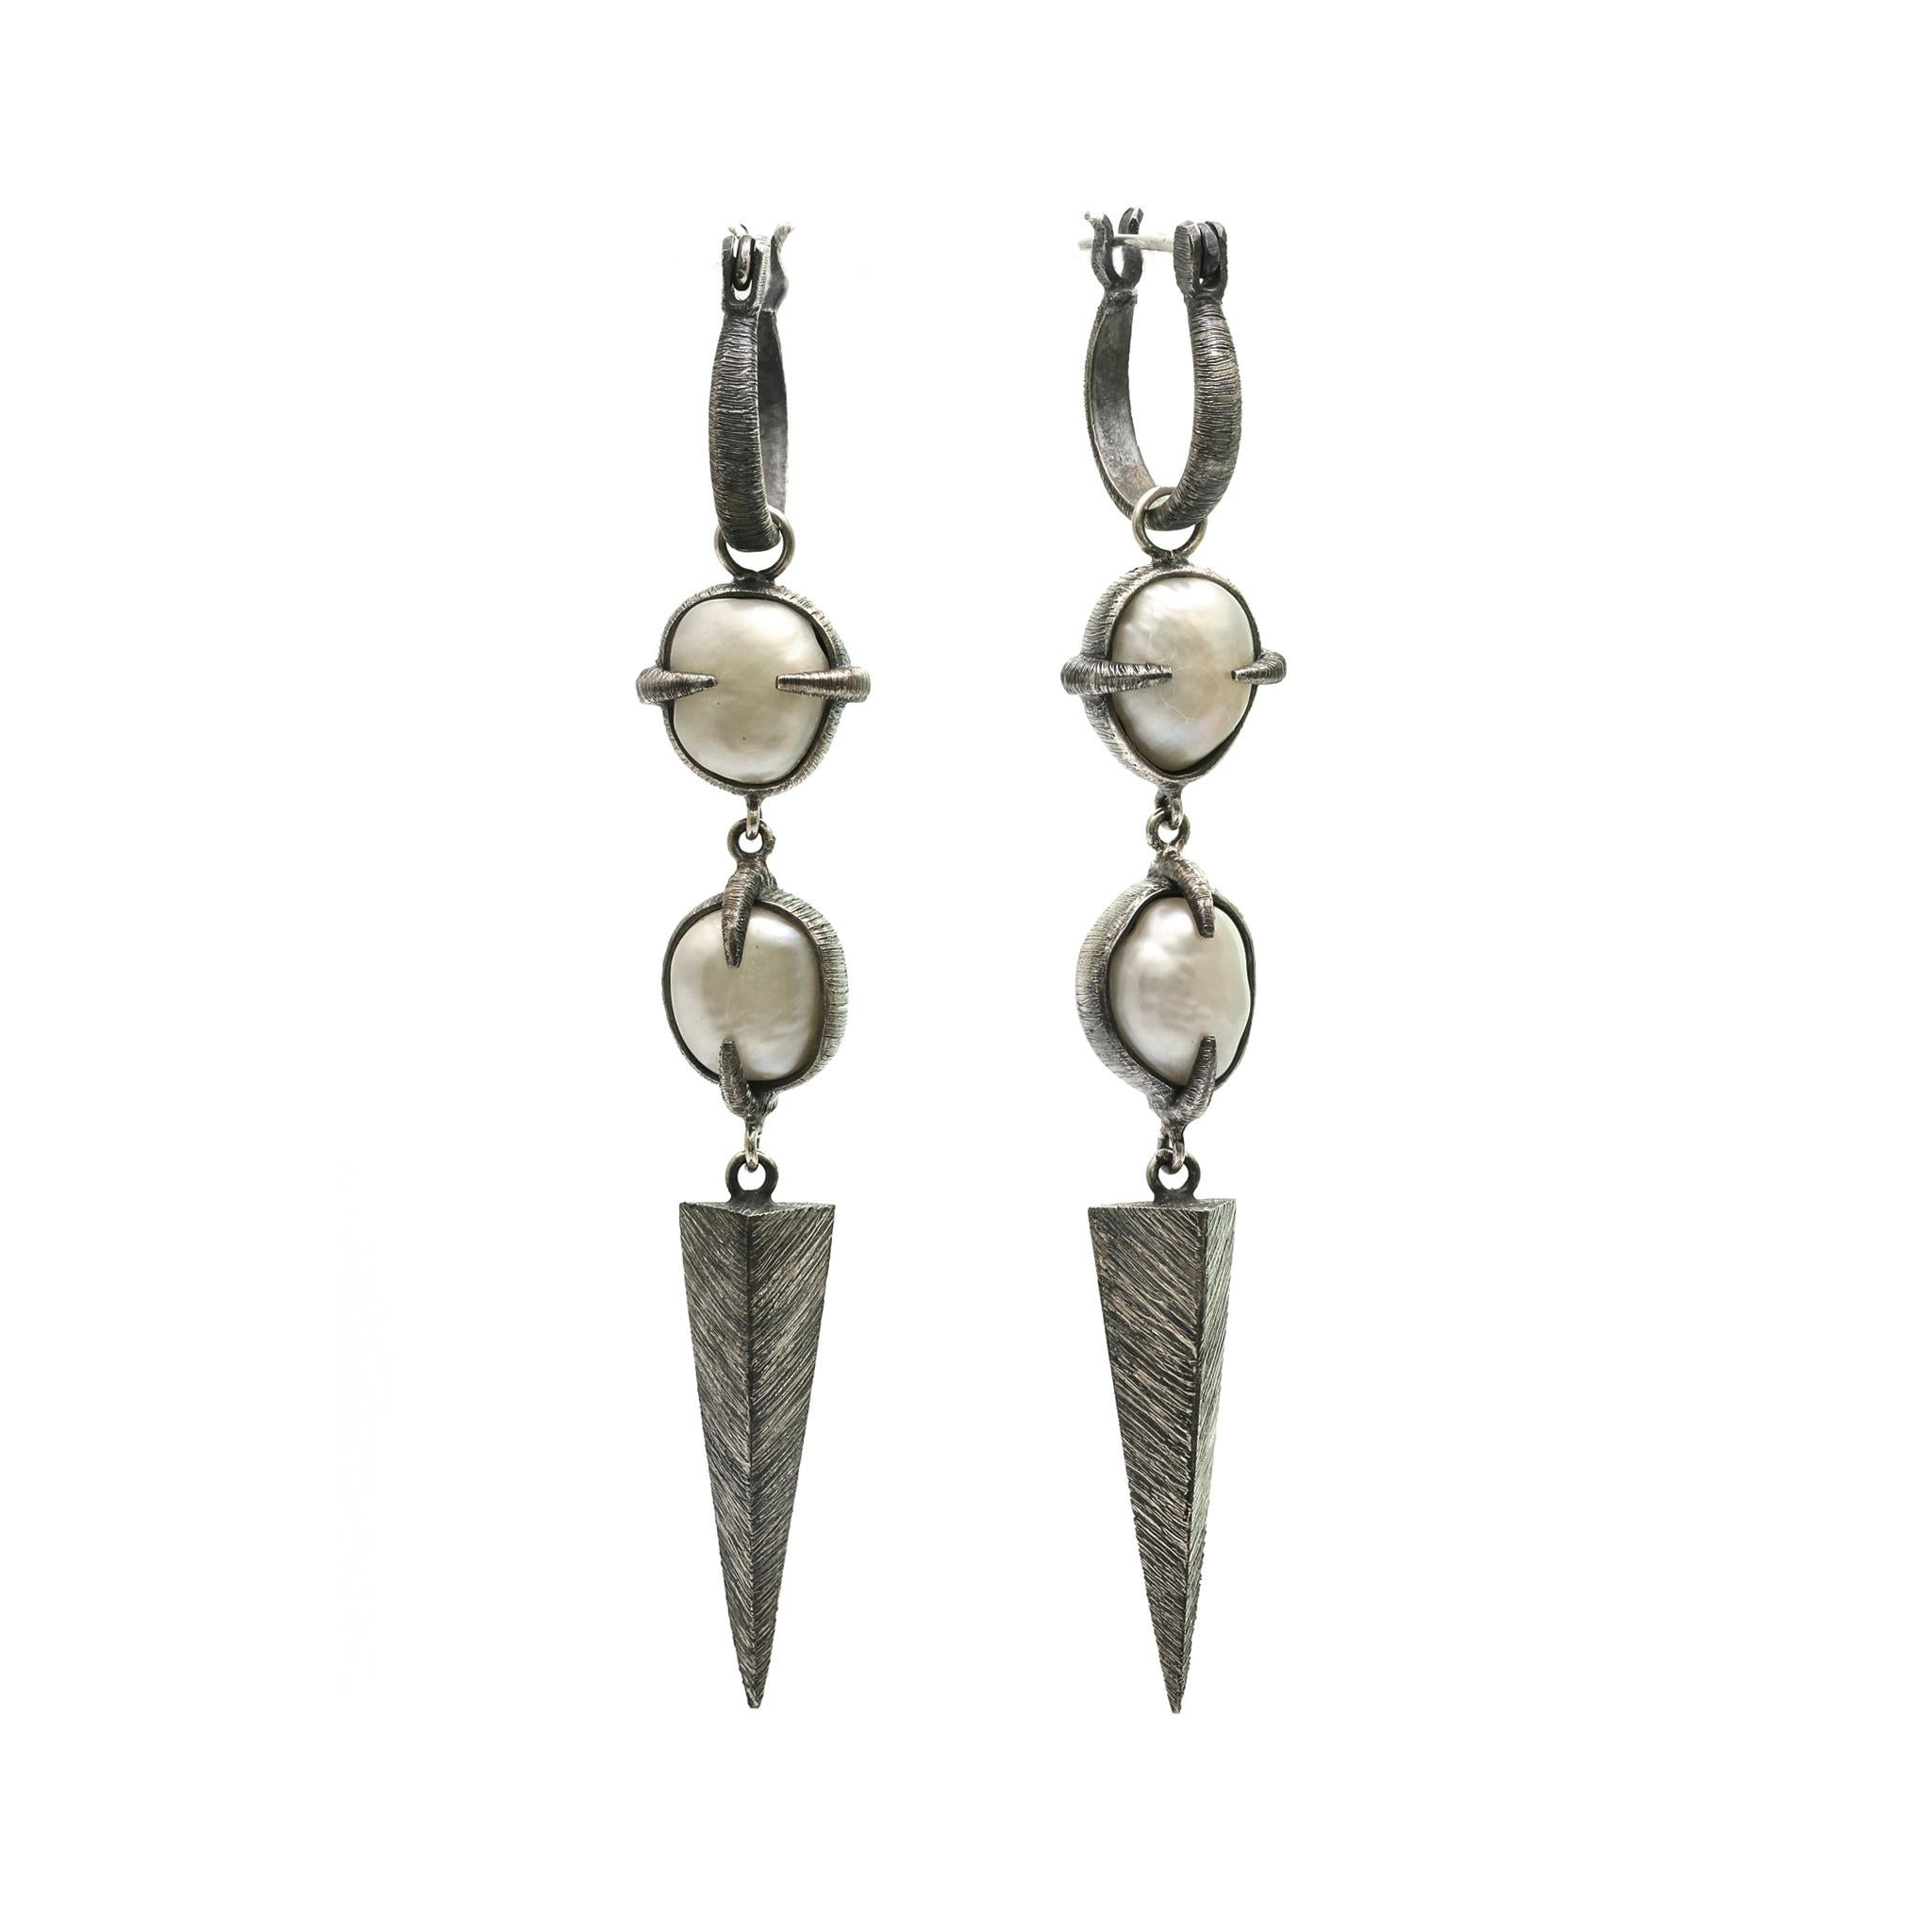 A pair of Baroque pearls clasped within textured and oxidised silver prongs that create a flow to which the eye is drawn to the end point of each earring. 
925 Sterling Silver, Etched & Oxidized
Free size Baroque Pearls
Size: 0,47